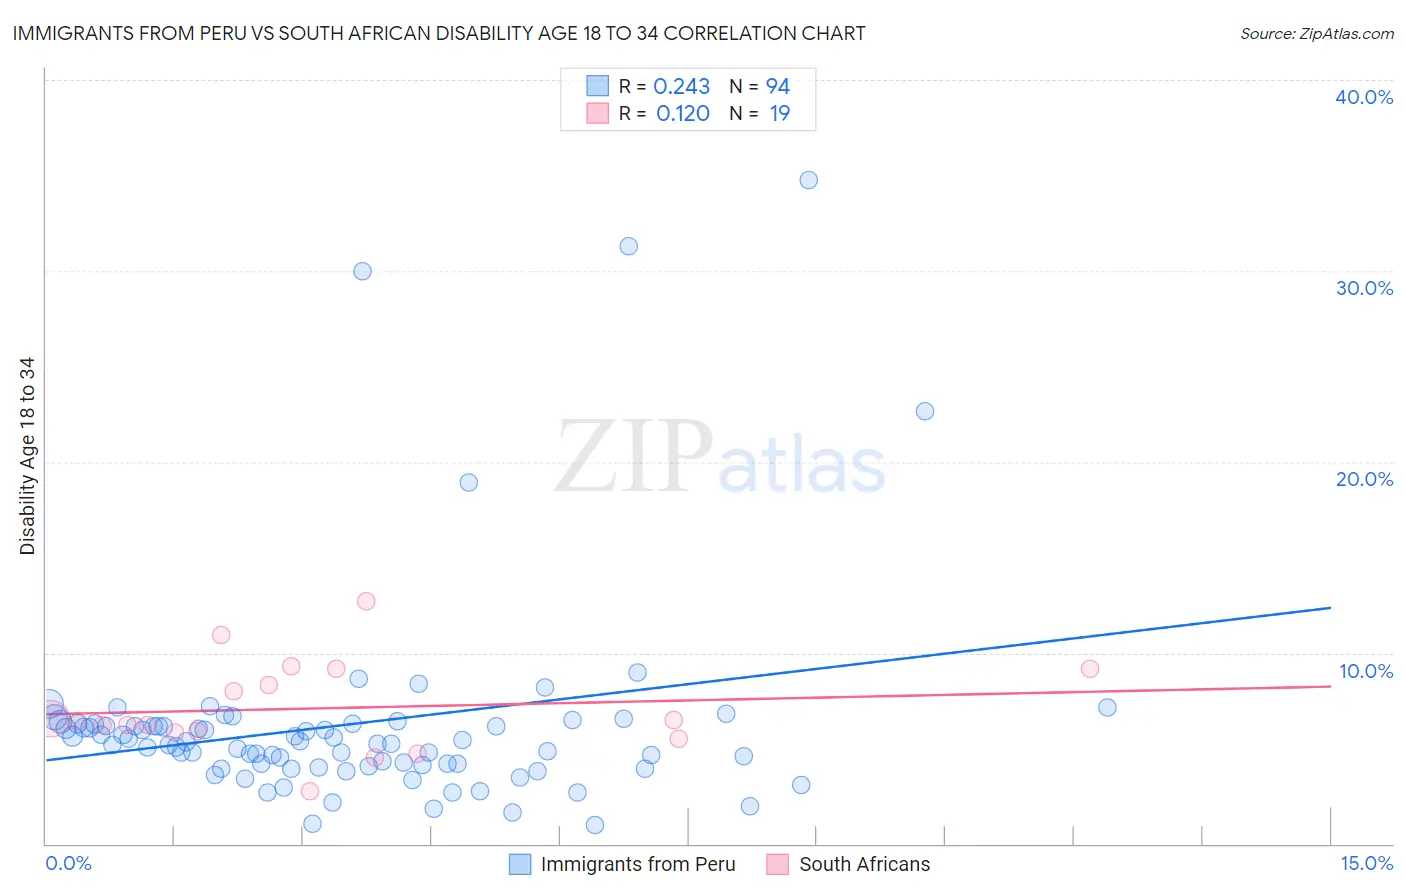 Immigrants from Peru vs South African Disability Age 18 to 34